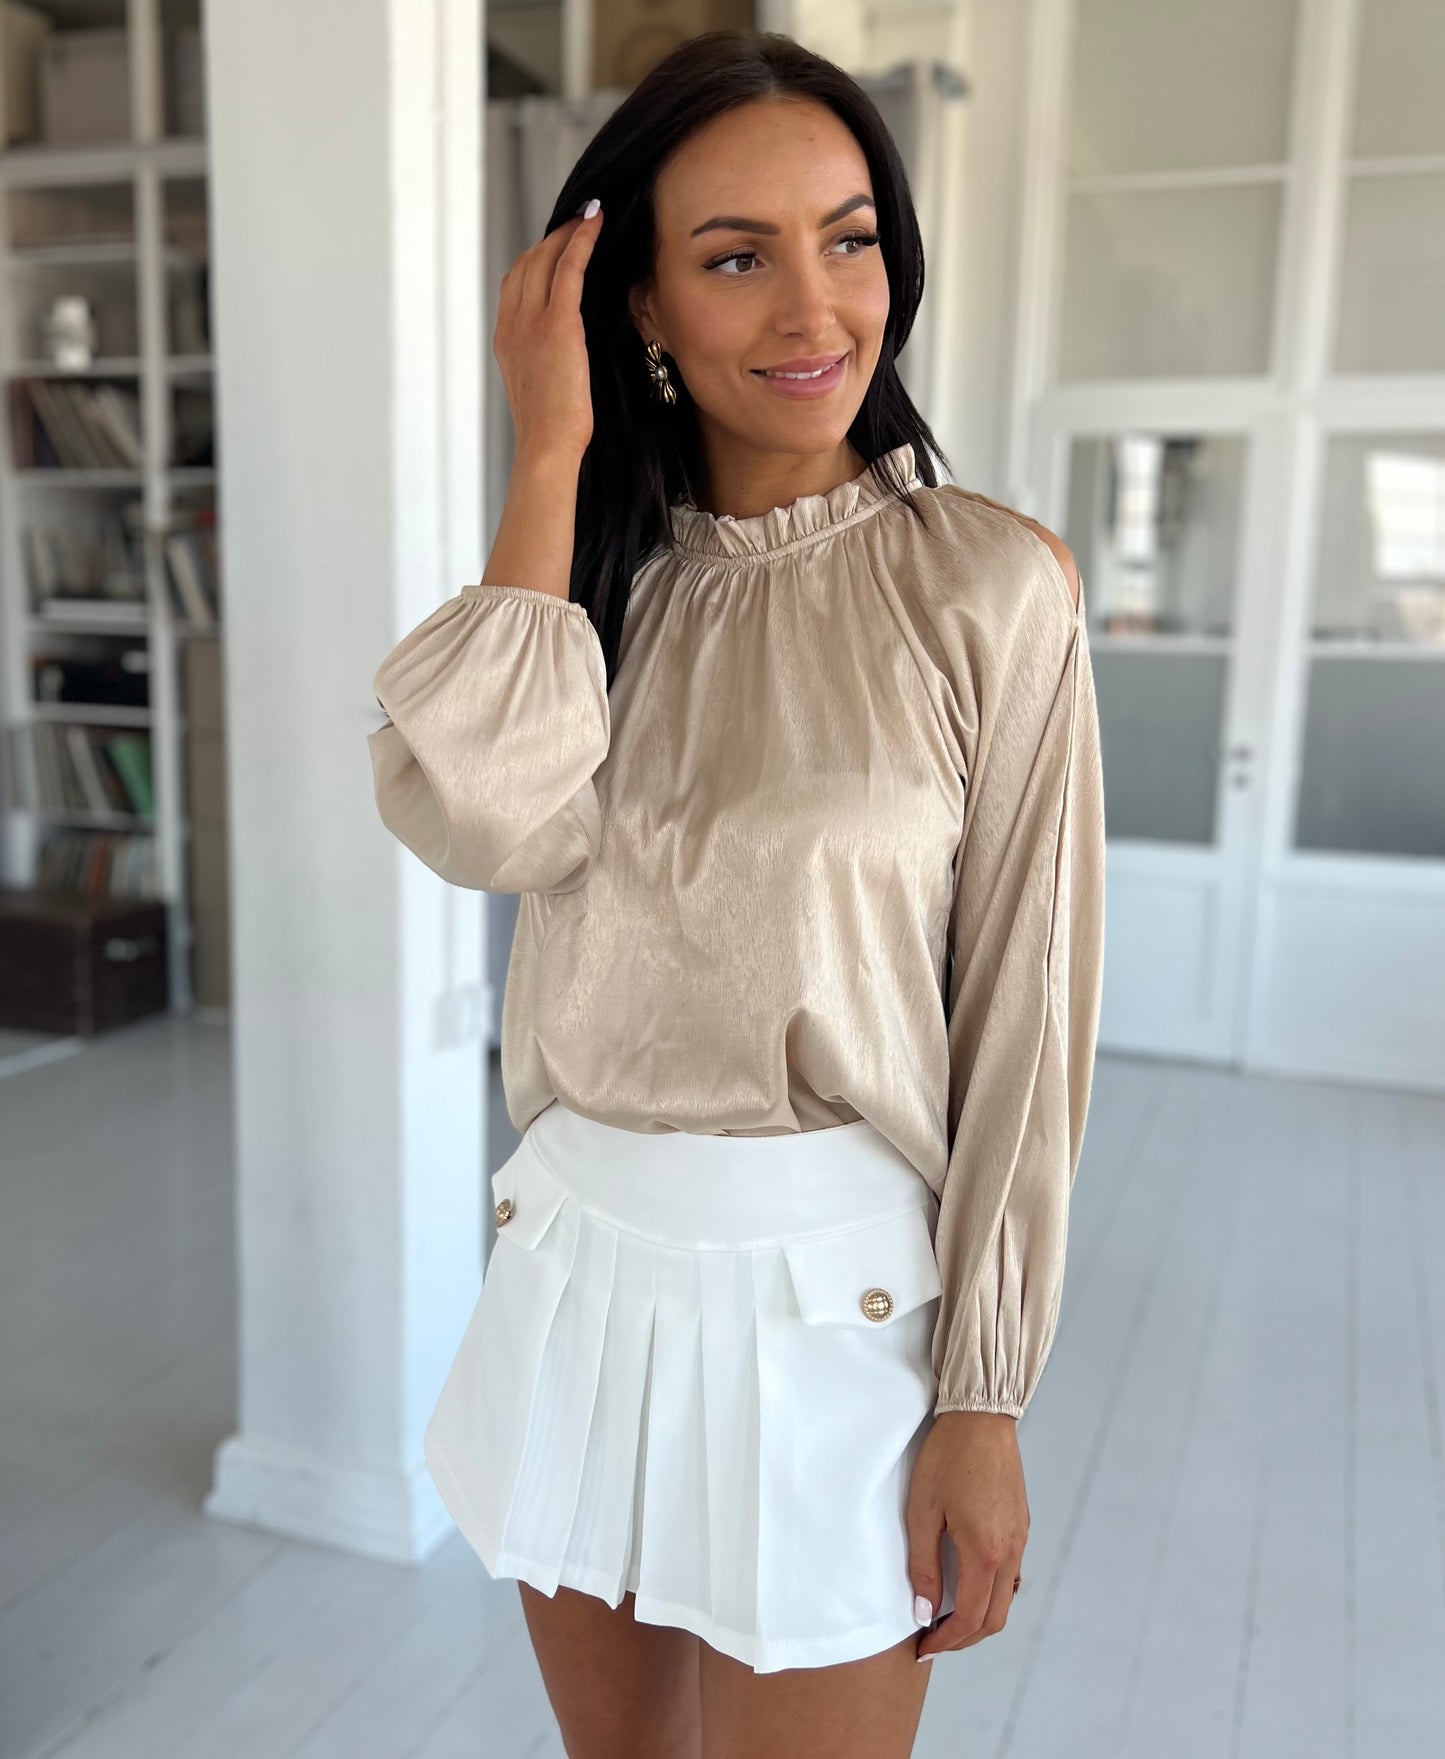 Laura champagne blouse